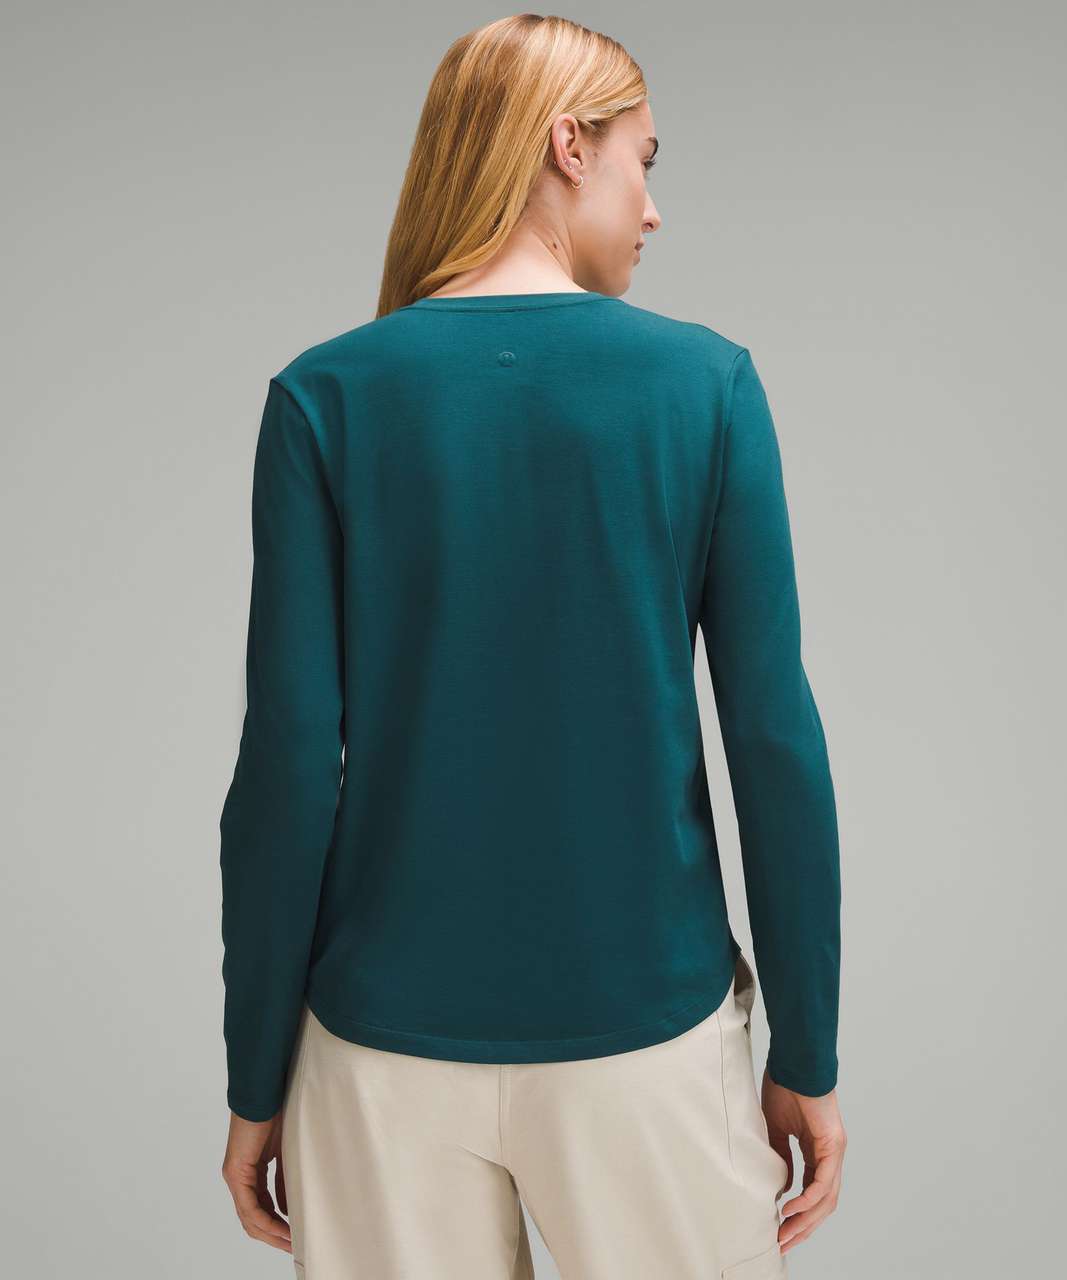 Lululemon EUC Long Sleeve Shirt in Teal Size M - $56 - From TheSouthern